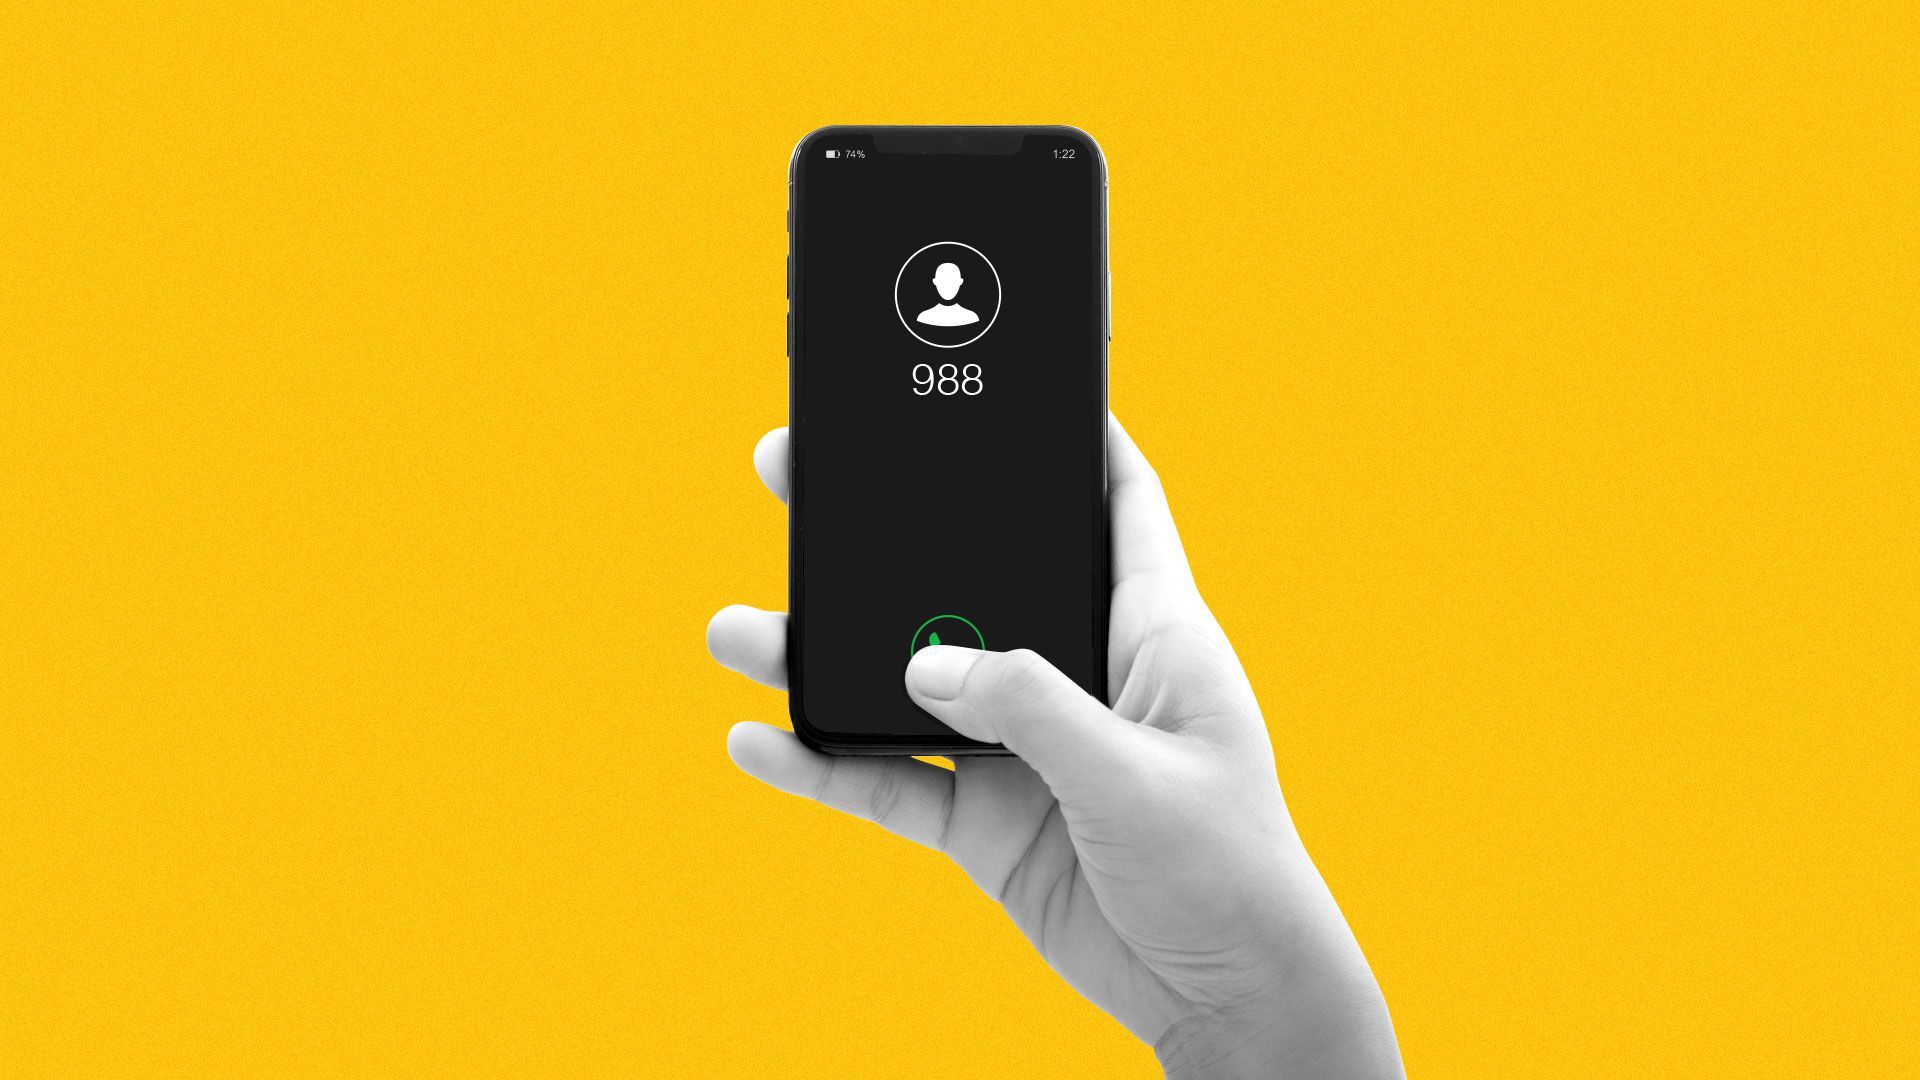 Illustration of person dialing 988 on smartphone